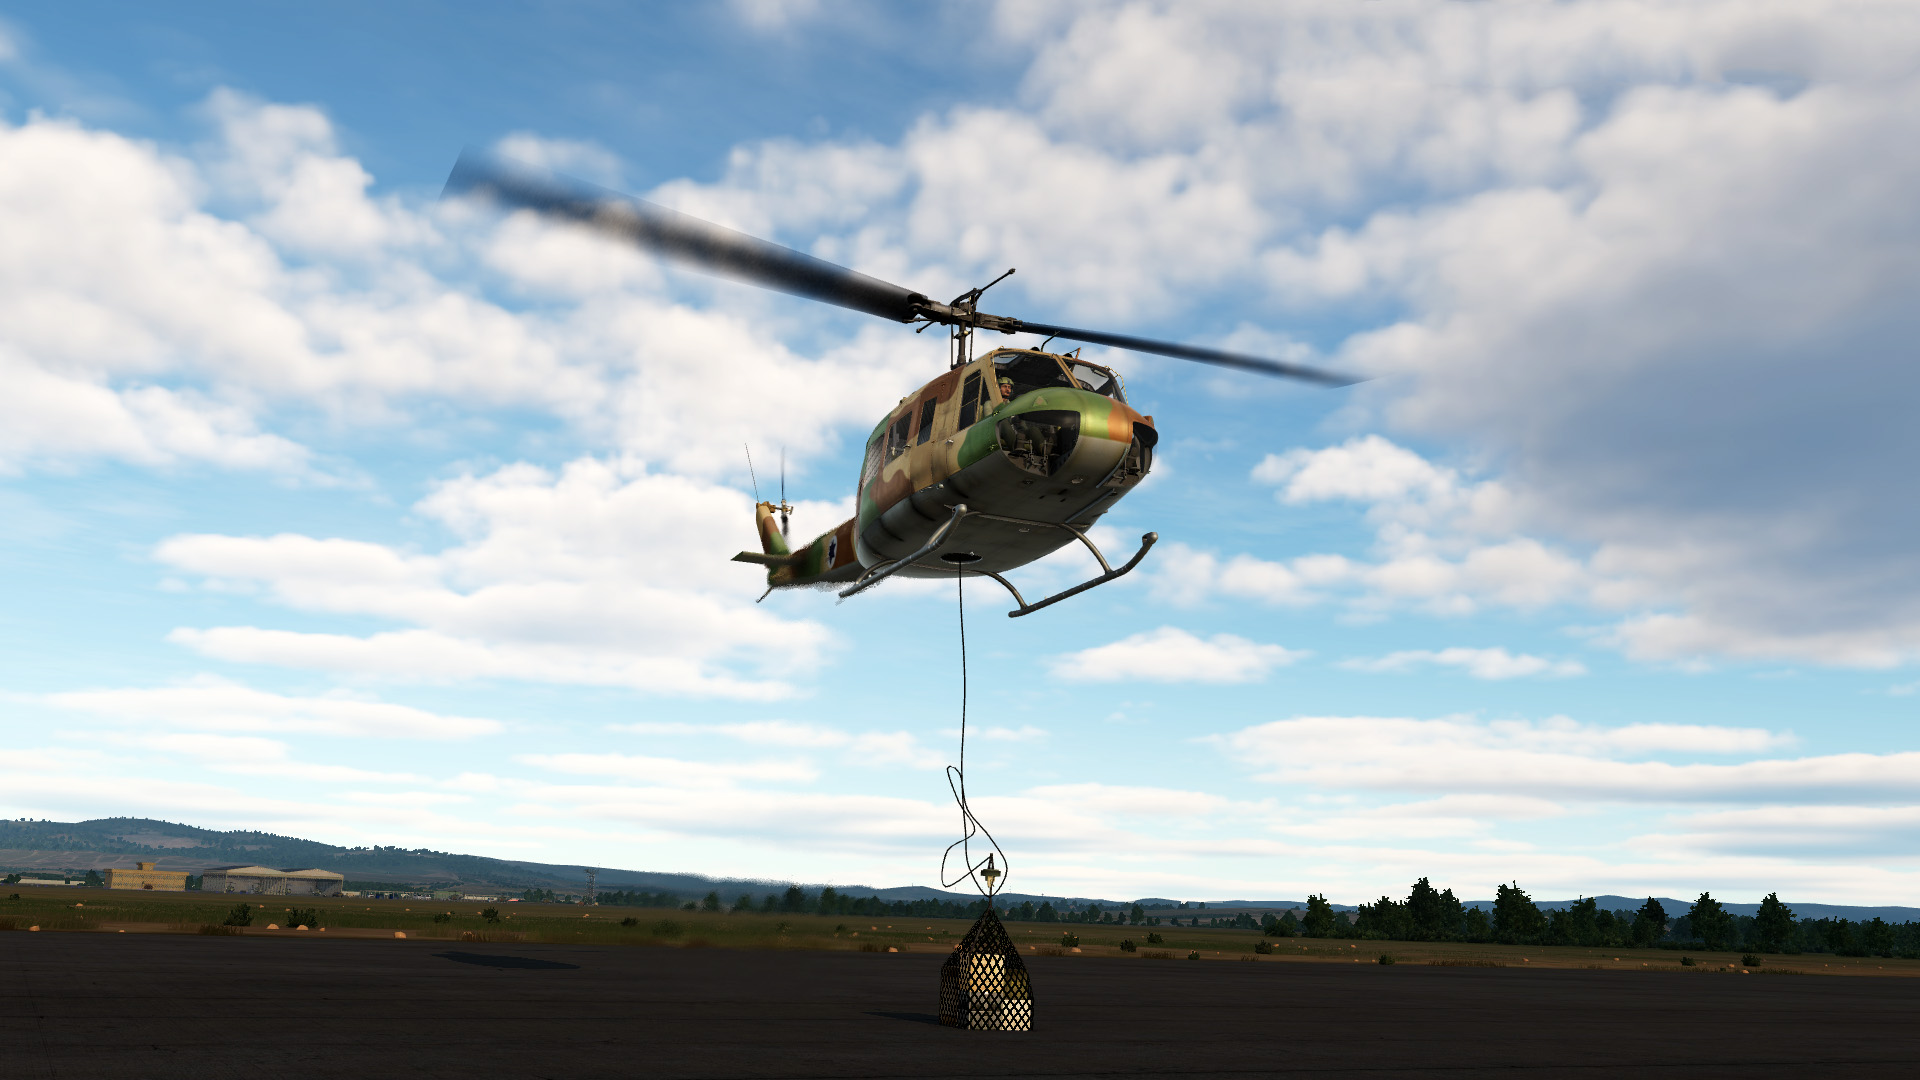 Sling load training for the Huey